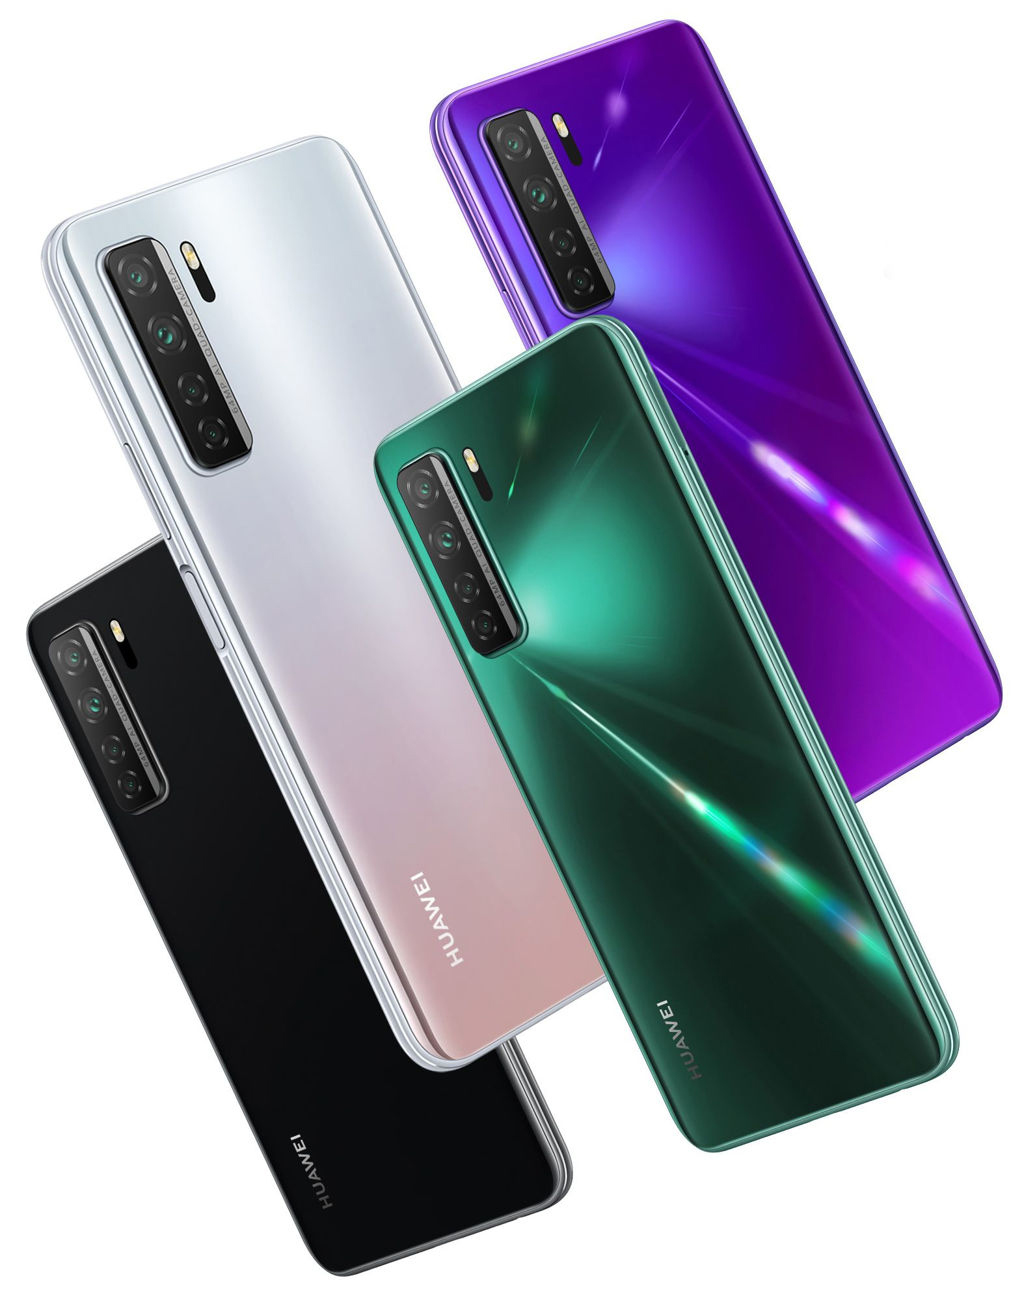 Huawei nova 7 SE Phone Specifications And Price - Deep Specs